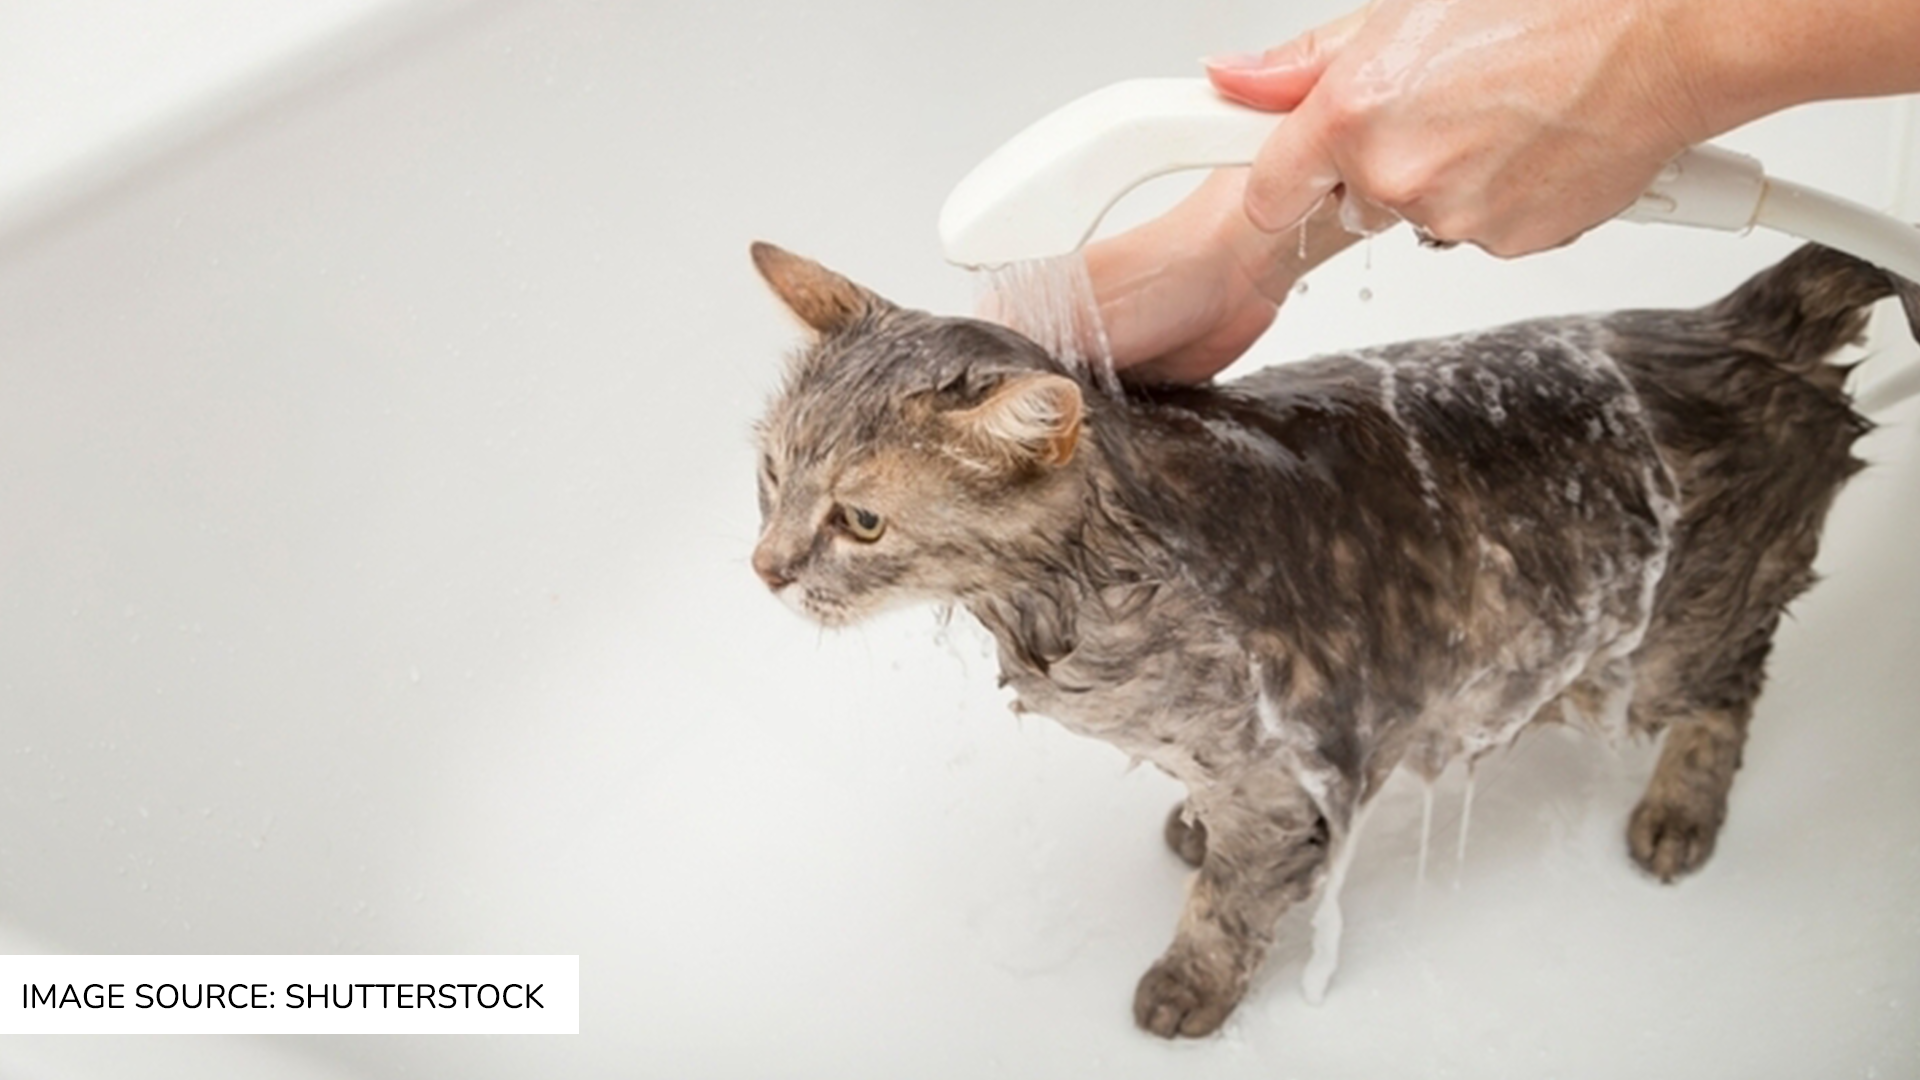 How to Take Care of Your Cat’s Hygiene?